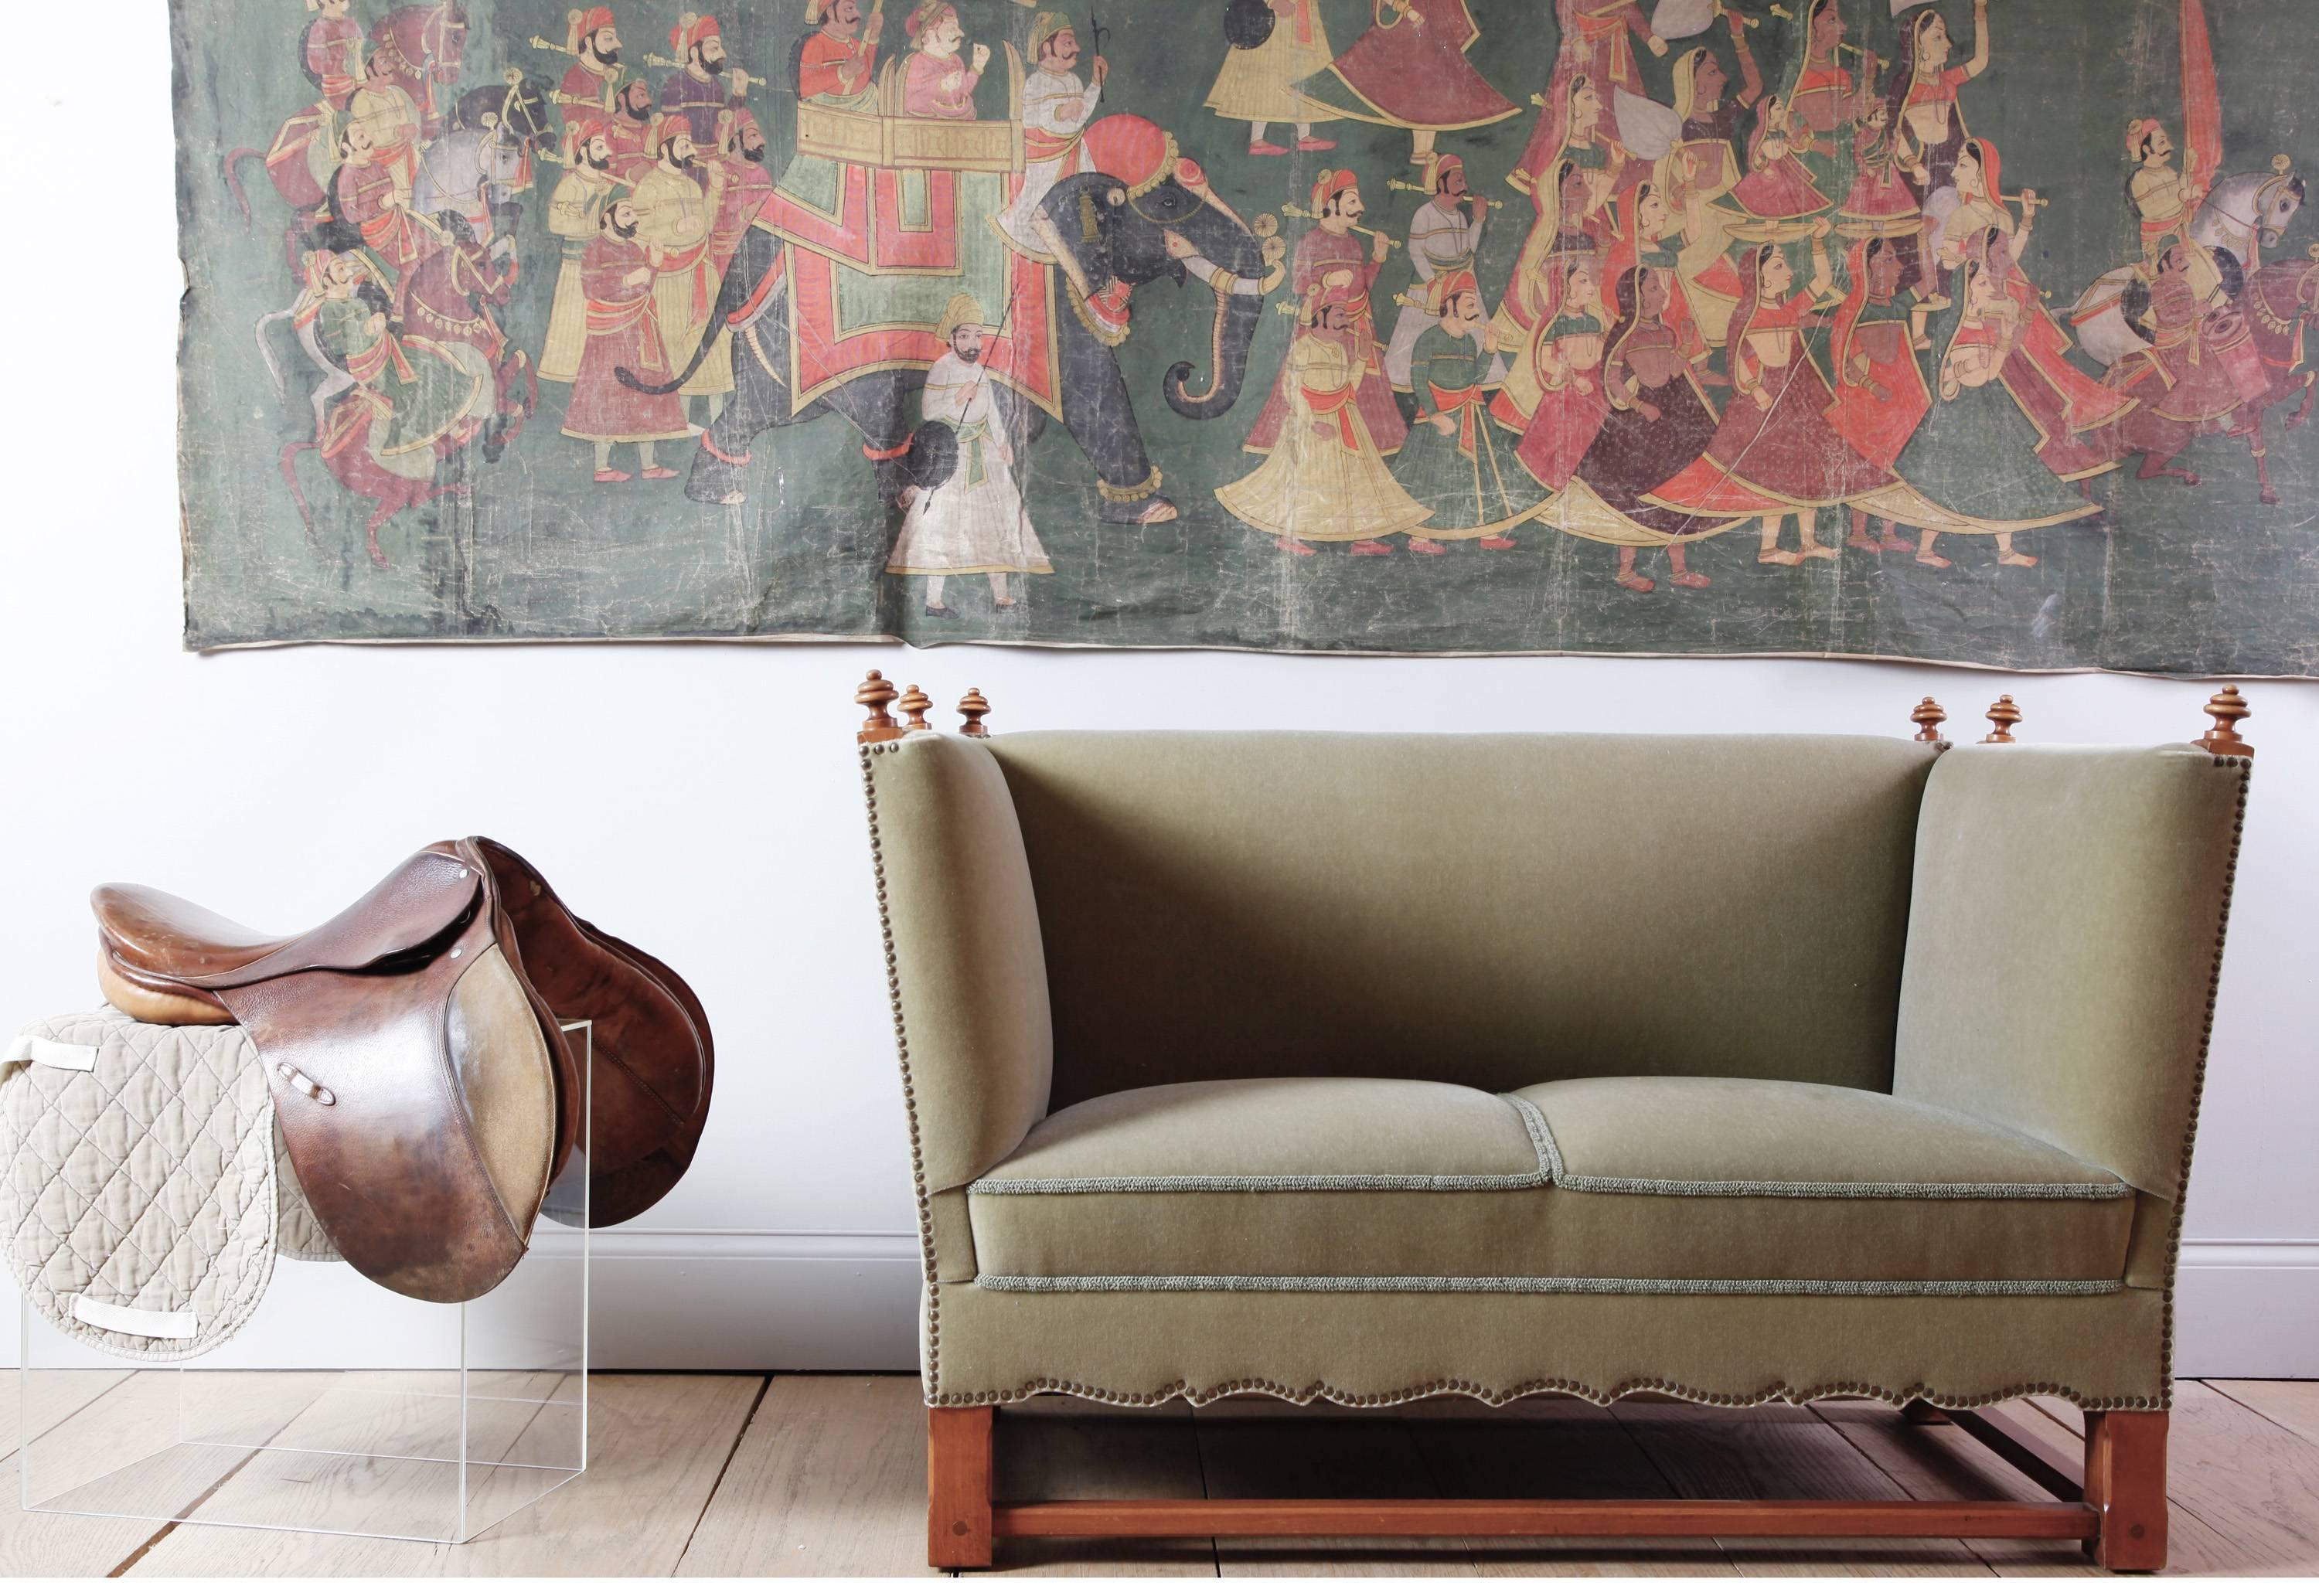 Elias Barup was the first furniture designer for Gärsnäs AB in Sweden. This fantastic settee, which dates from the beginning of his tenure there in the 1930s, is probably modeled on the Classic British Knole settee, though the arms are not